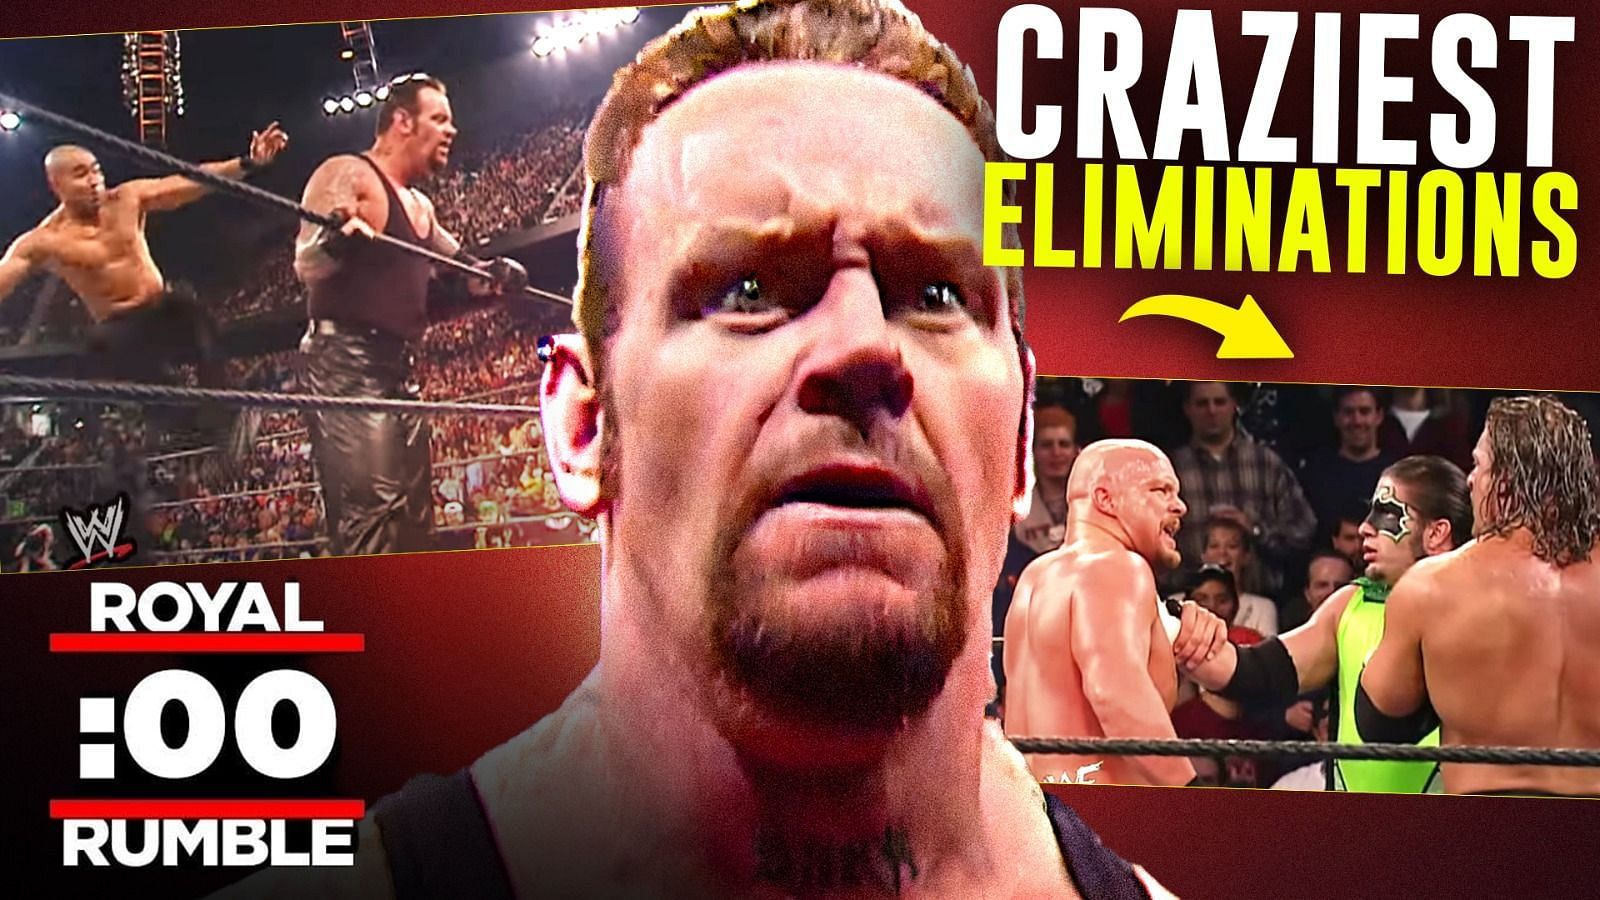 Craziest Eliminations in WWE Royal Rumble History - Part 1